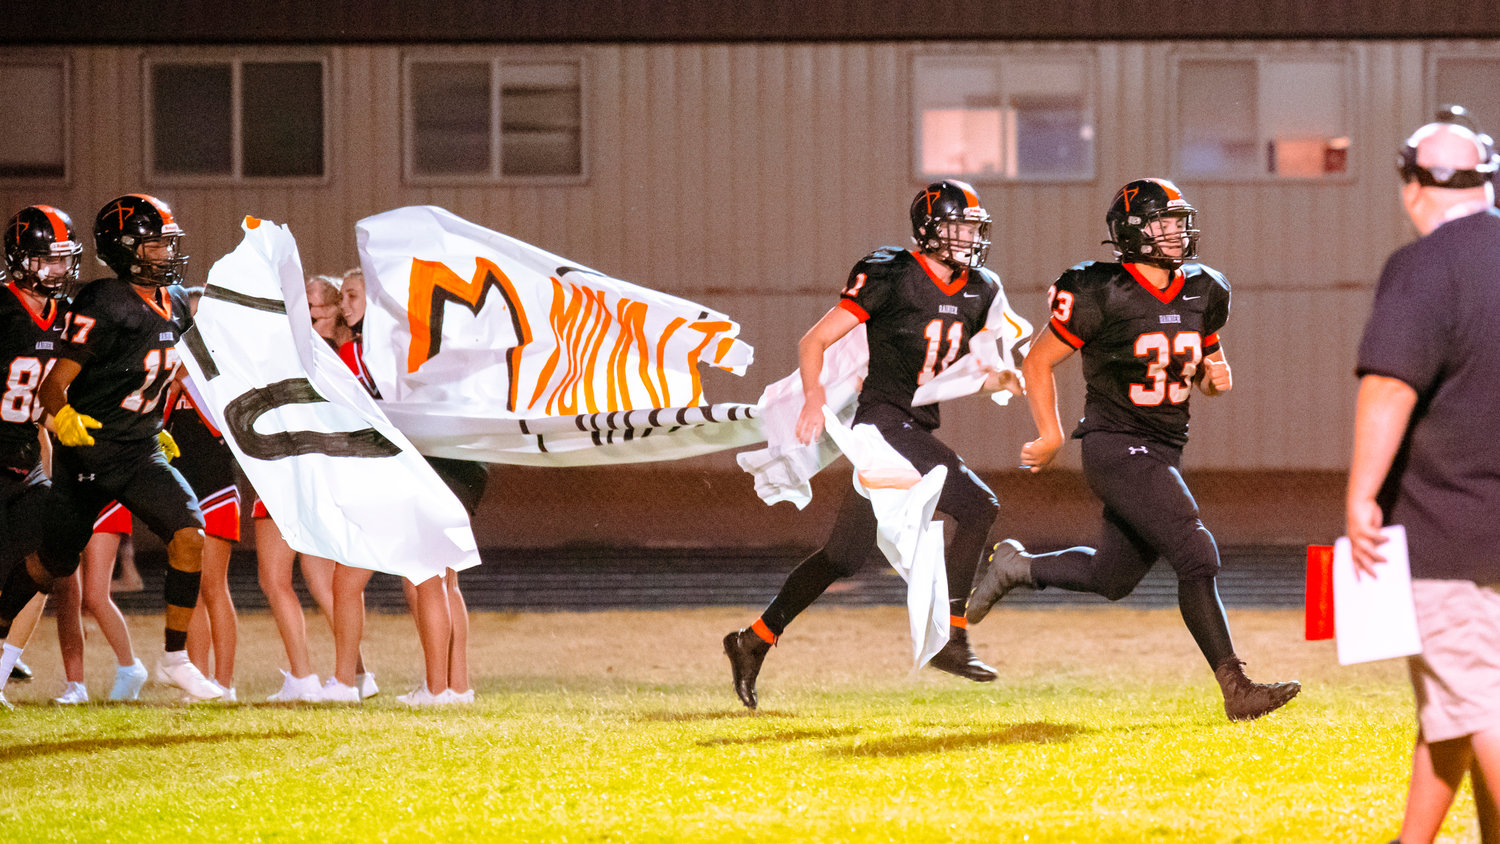 Rainier football players bust through a banner at halftime Friday night.